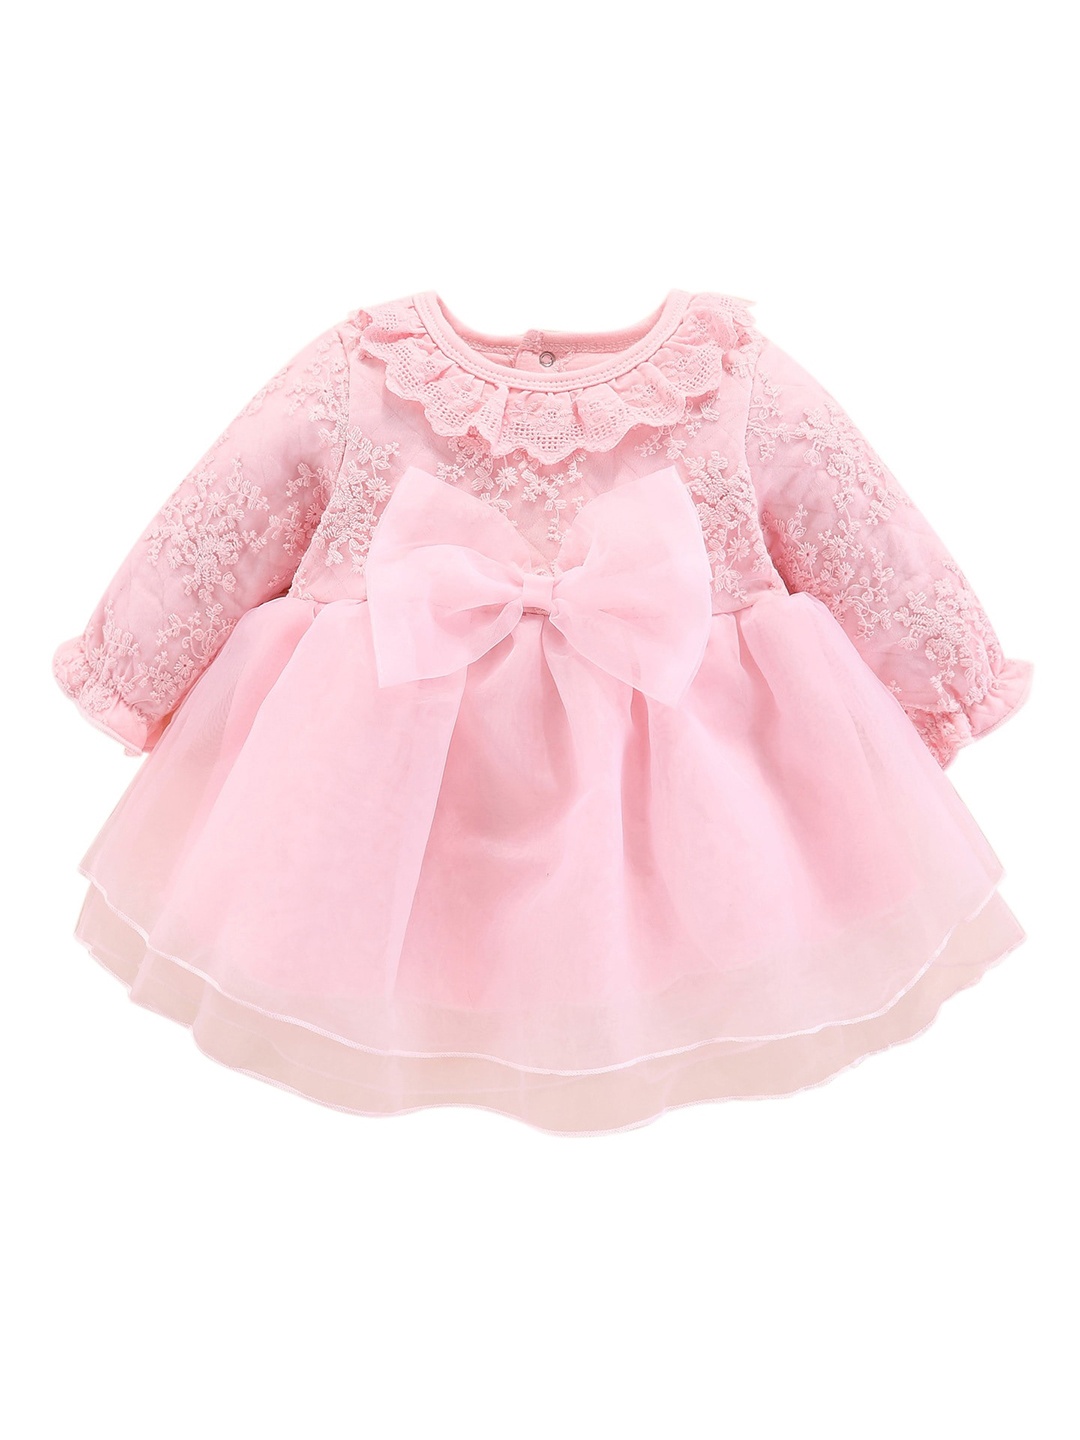 

StyleCast Infants Girls Pink Floral Embroidered Bow Detail Cotton Fit & Flare Dress